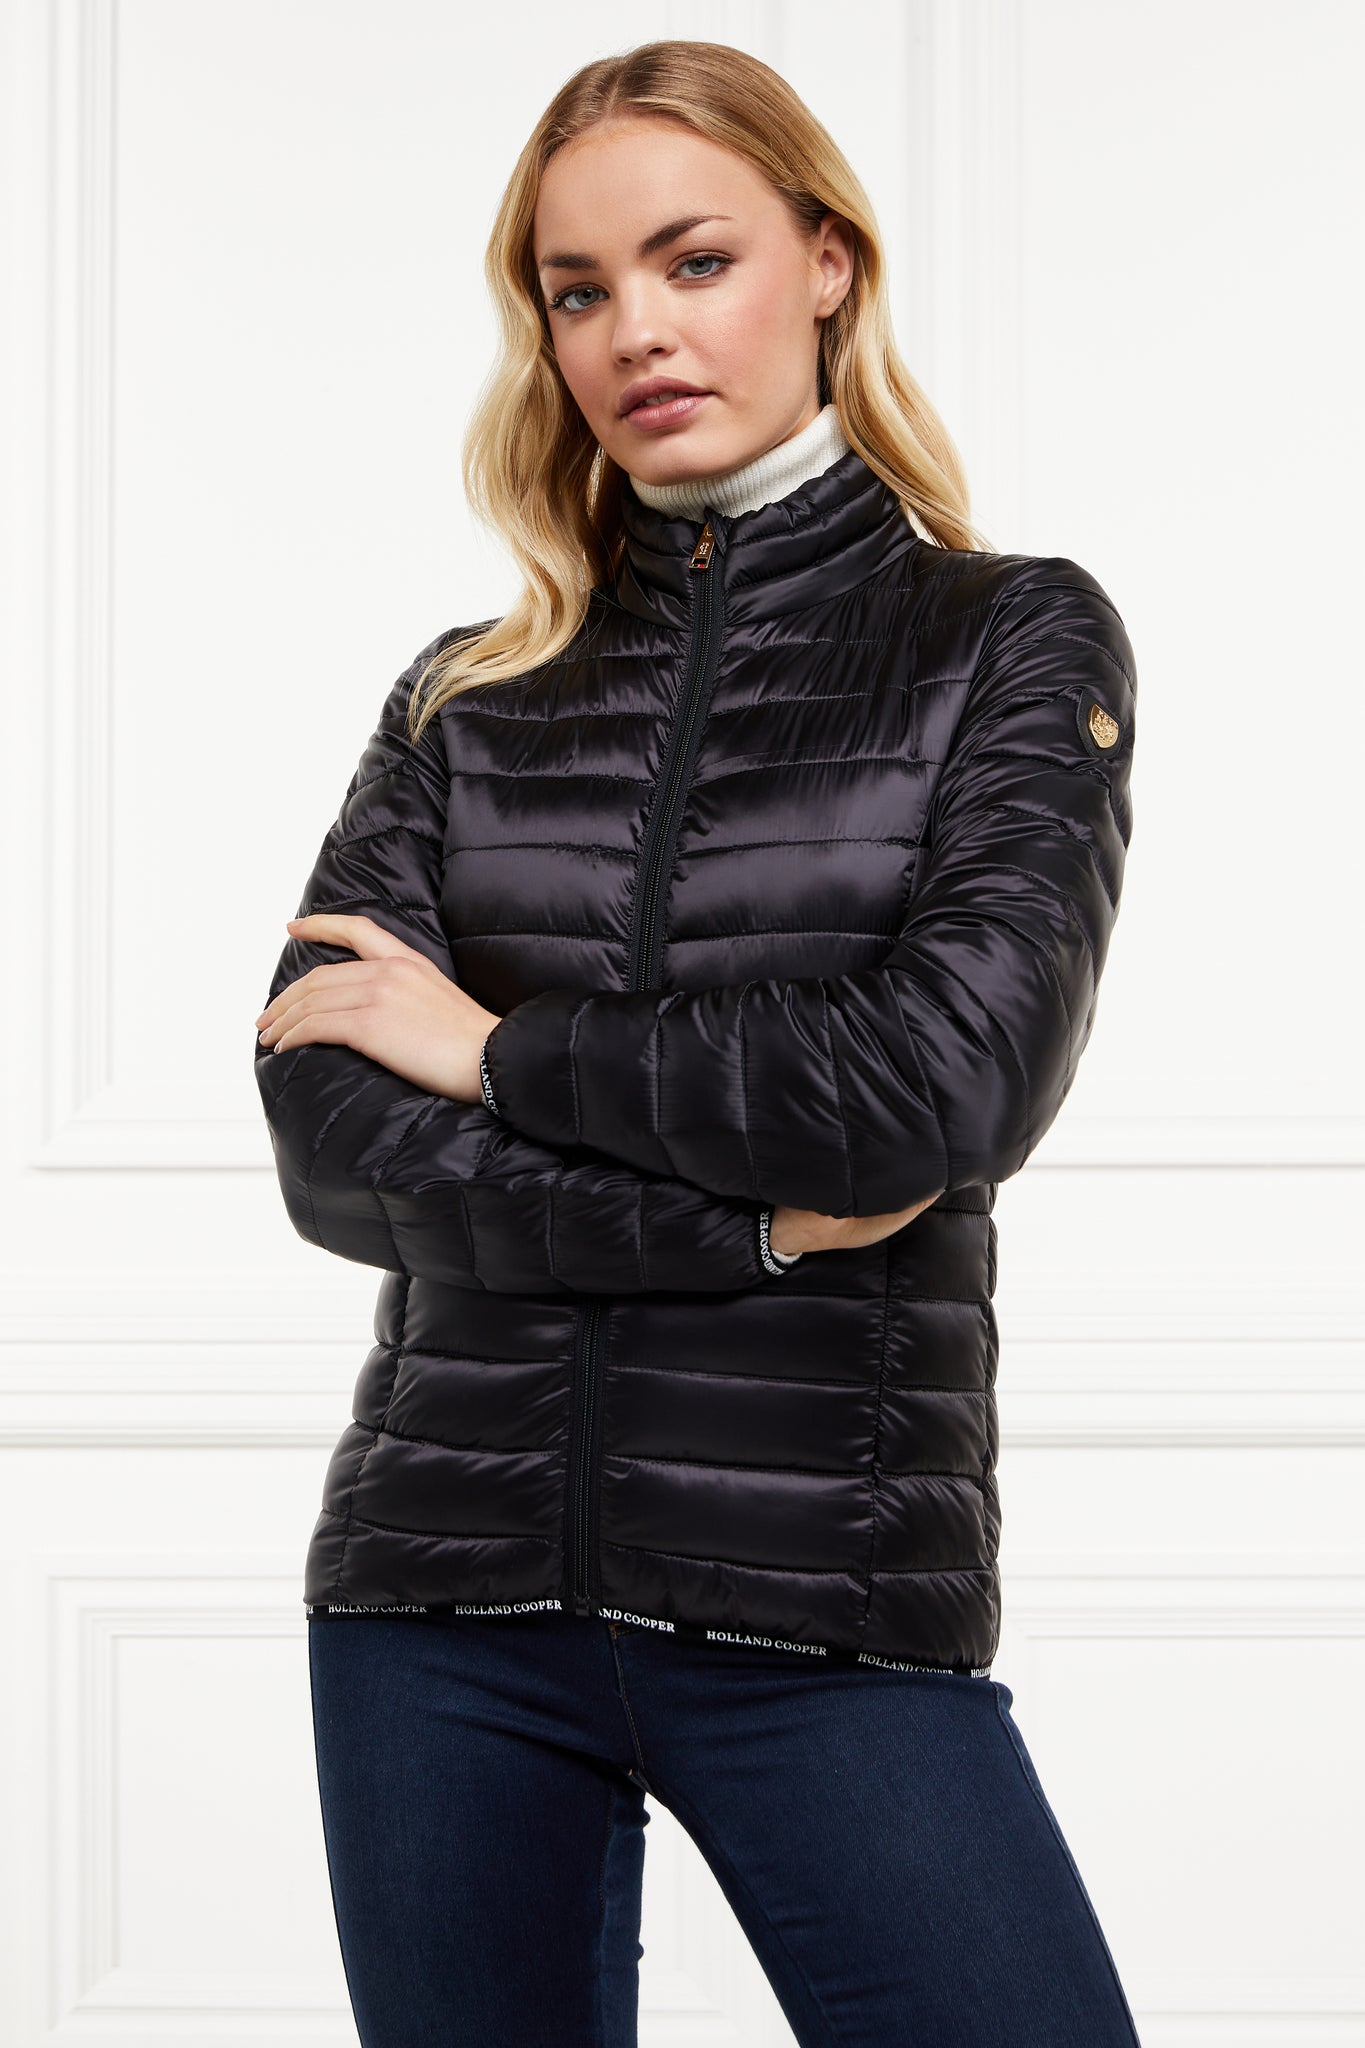 womens lightweight hoodless padded black jacket with embroidery detail on back high neck and elasticated cuffs and hem. easily packs away into separate small bag of the same colour with handle  